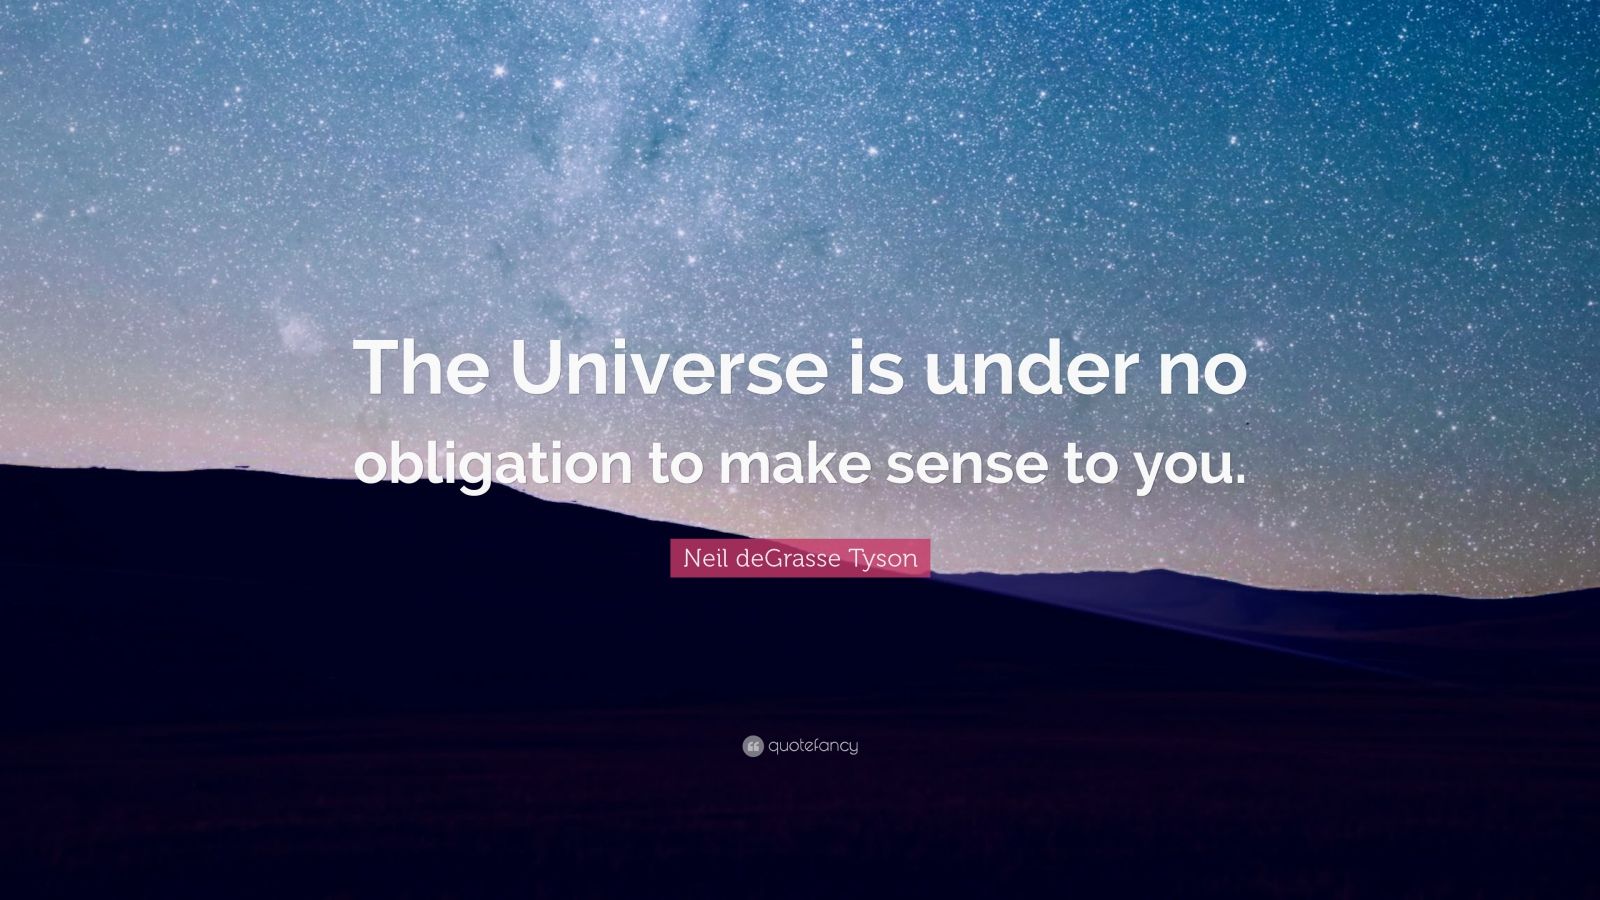 Neil deGrasse Tyson Quote: “The Universe is under no obligation to make ...